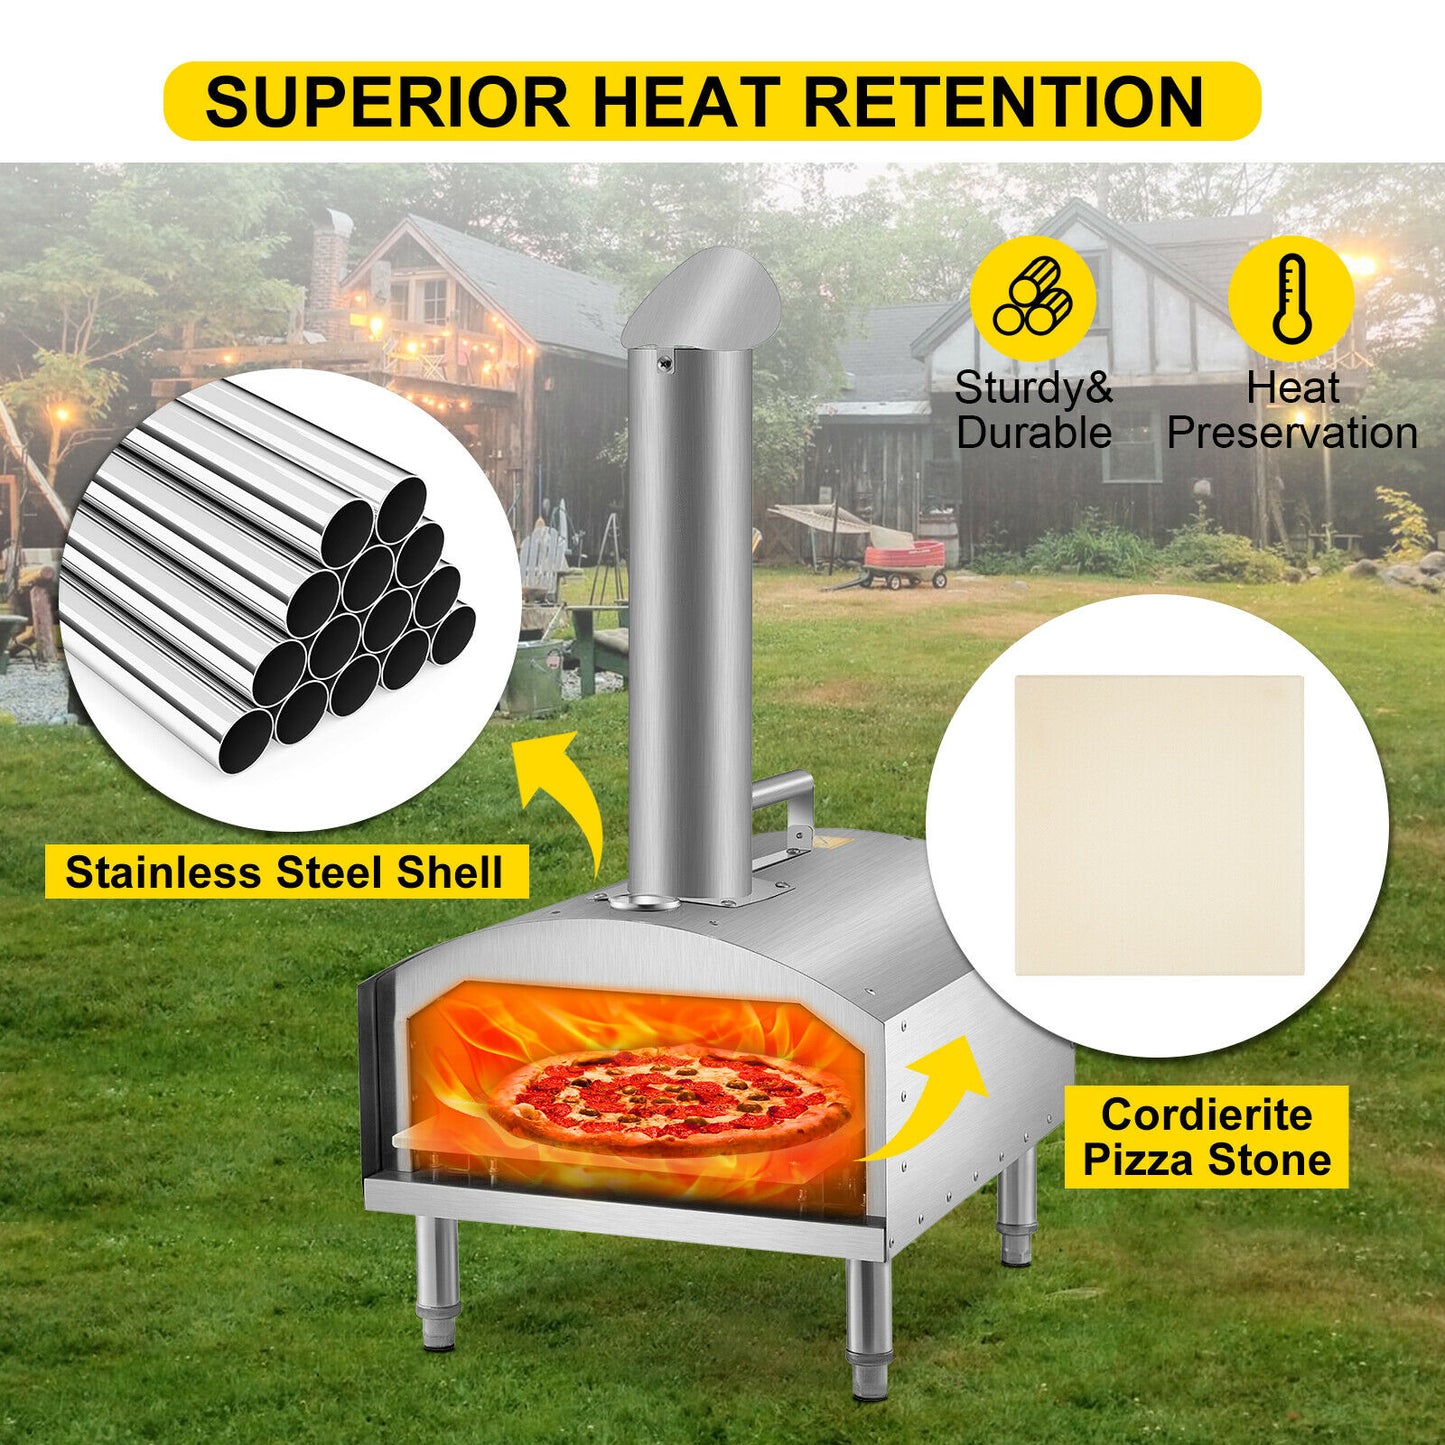 Portable wood fired stainless steel pizza oven for outdoor BBQ, picnics, and baking - 12" size.